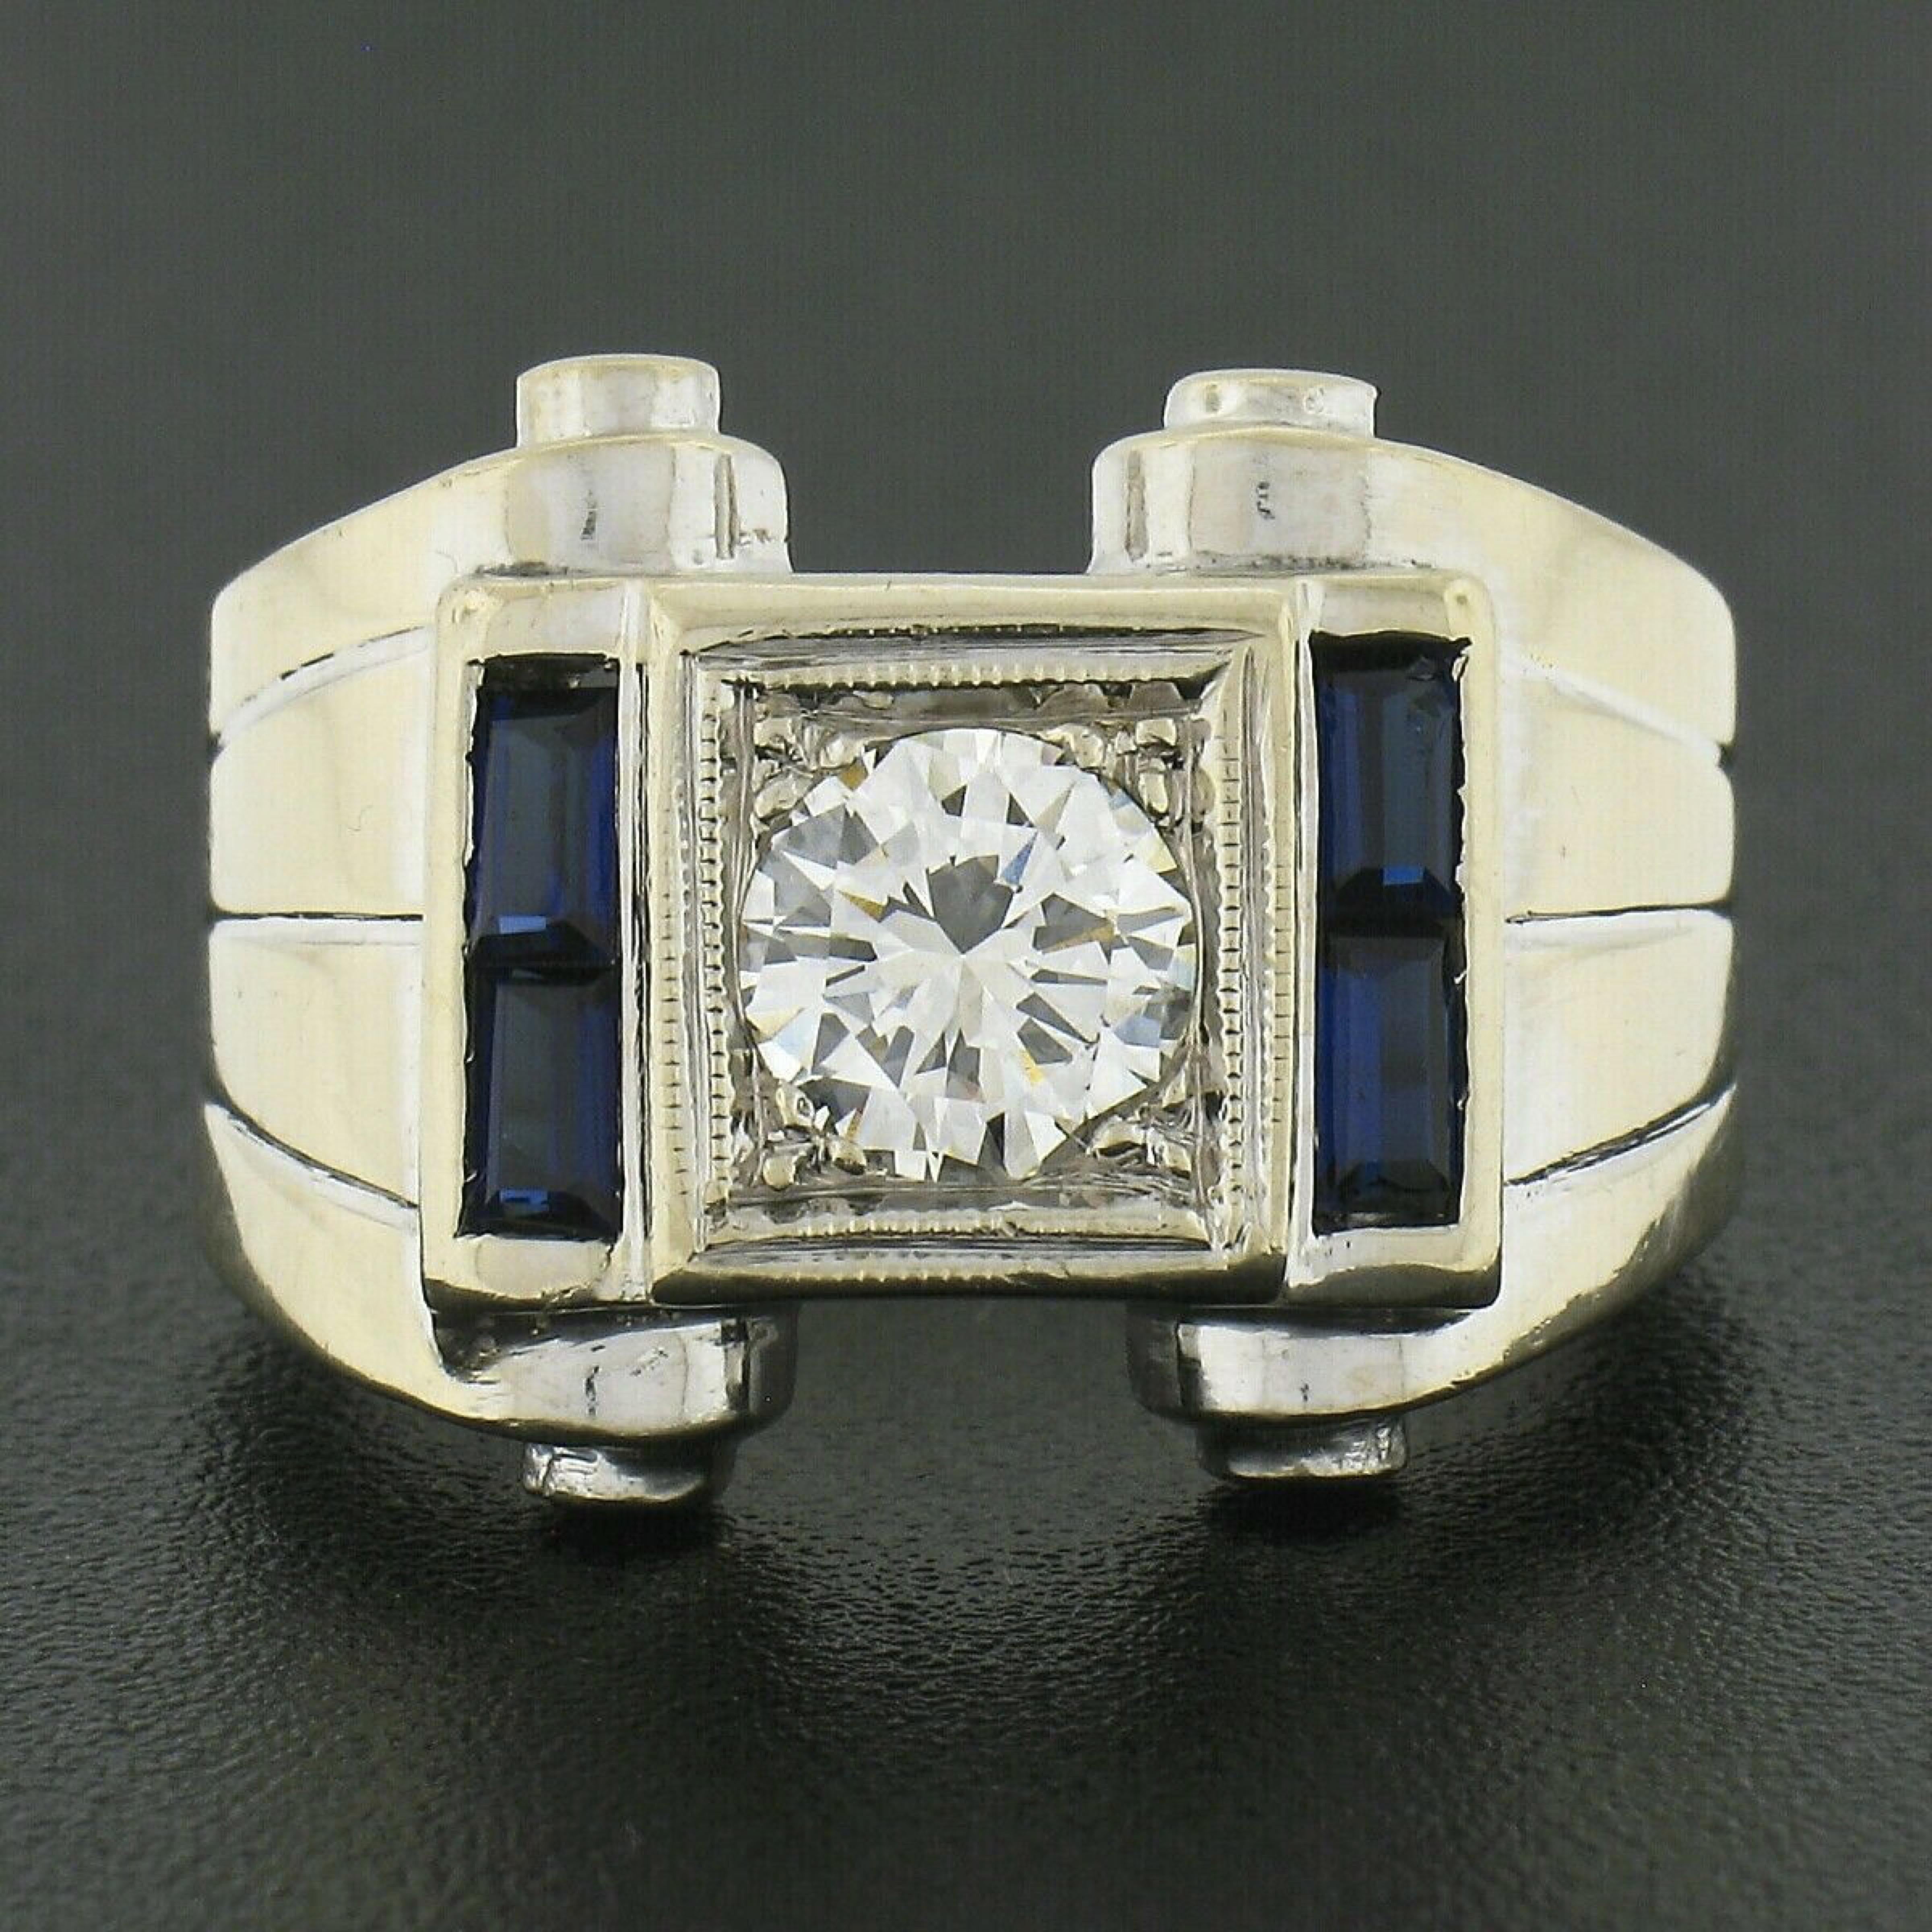 This beautiful vintage men's ring was crafted in solid 14k white gold and features a very fine quality old transitional cut diamond solitaire neatly set at the center of a squared frame. This stunning diamond weighs approximately 0.78 carats and